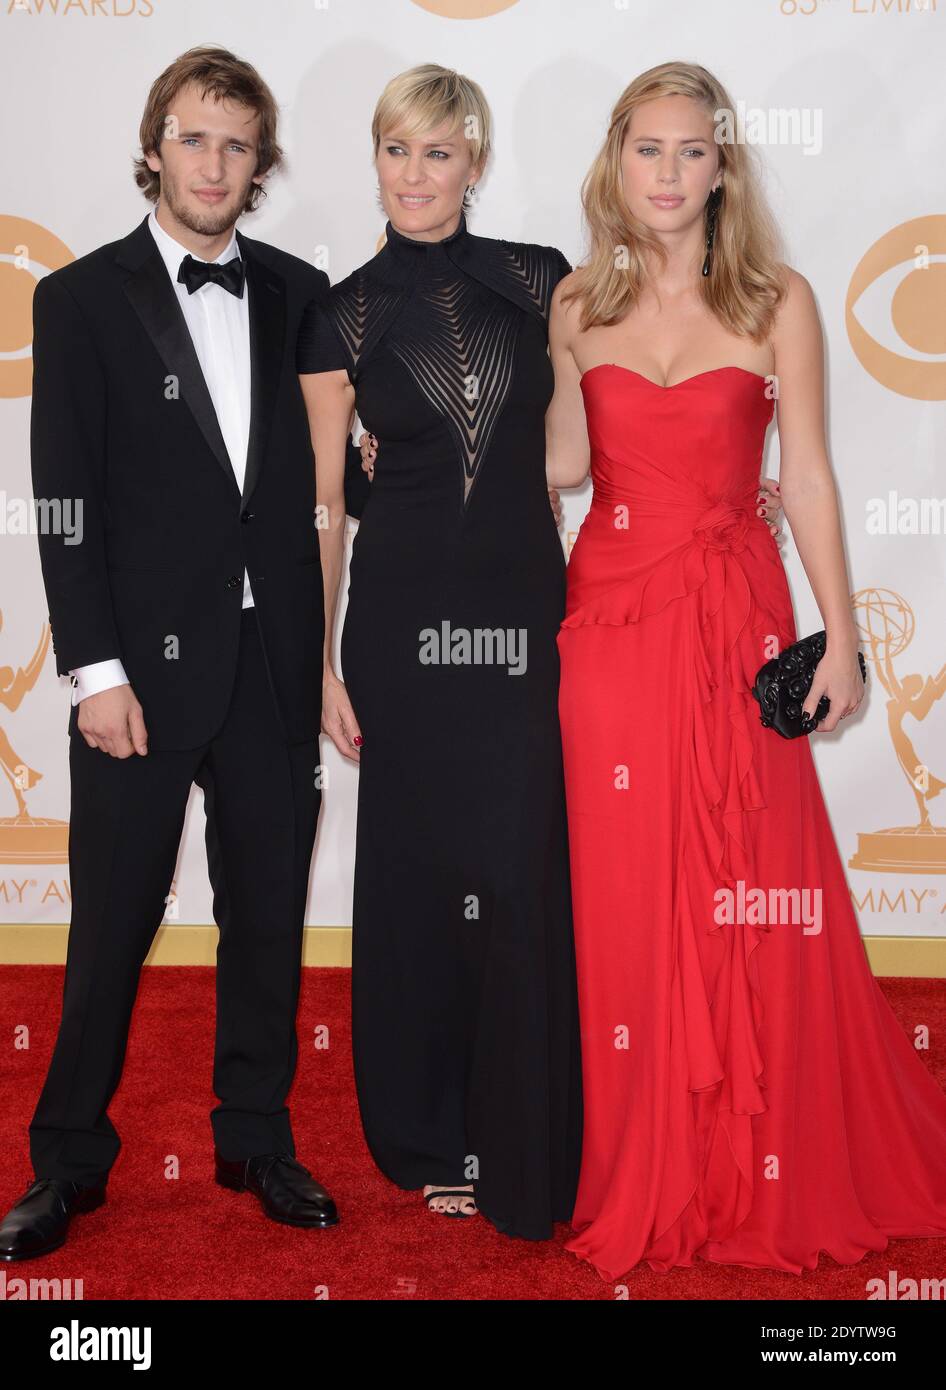 Dylan Penn, Robin Wright and Hopper Penn arrive at the 65th Annual  Primetime Emmy Awards held at Nokia Theatre L.A. Live on September 22, 2013  in Los Angeles, CA, USA. Photo by